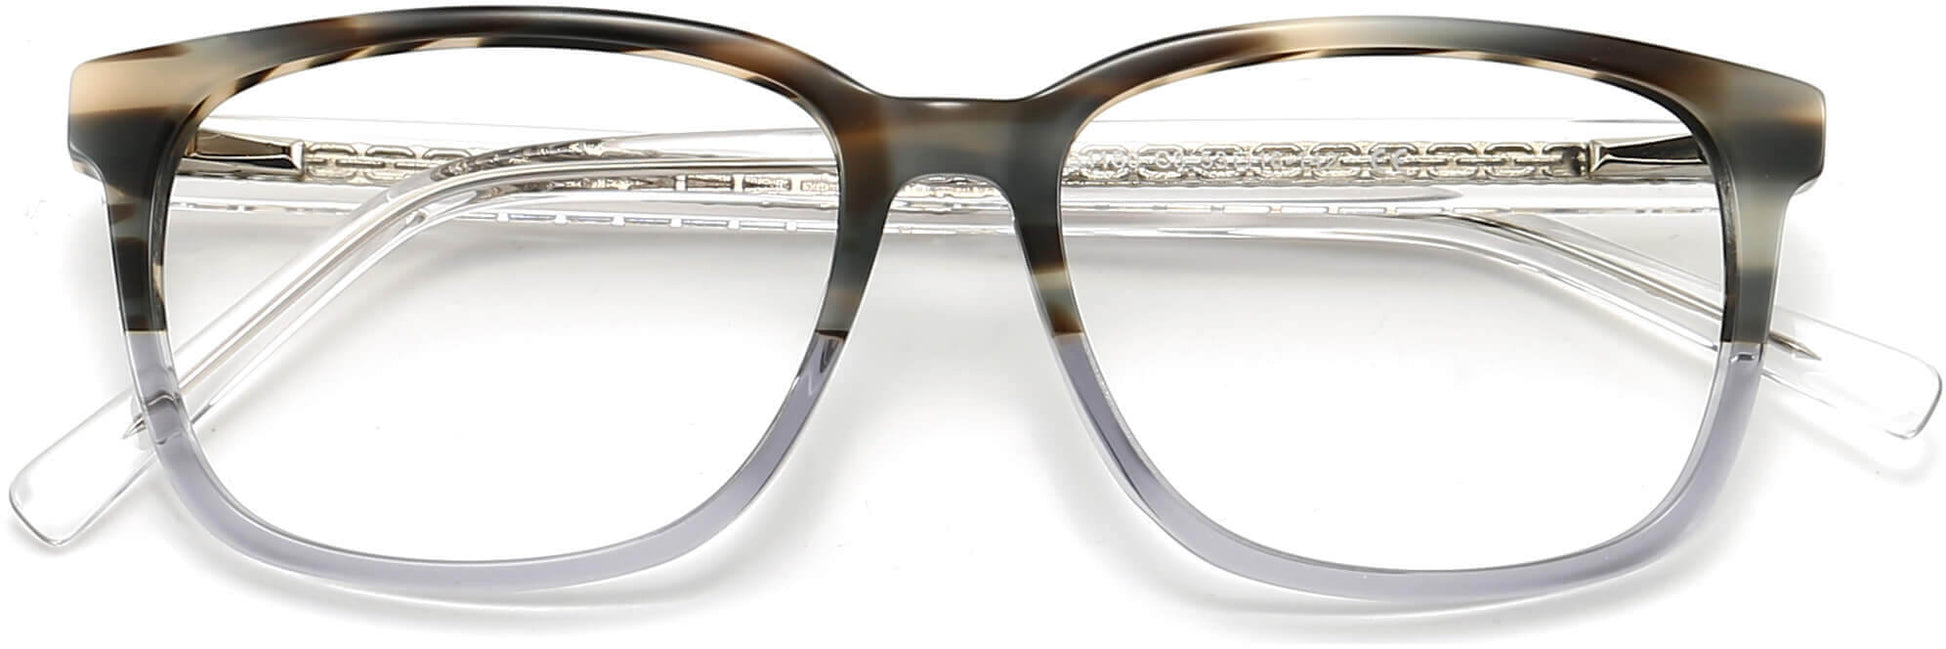 Mabel Square Tortoise Eyeglasses from ANRRI, closed view